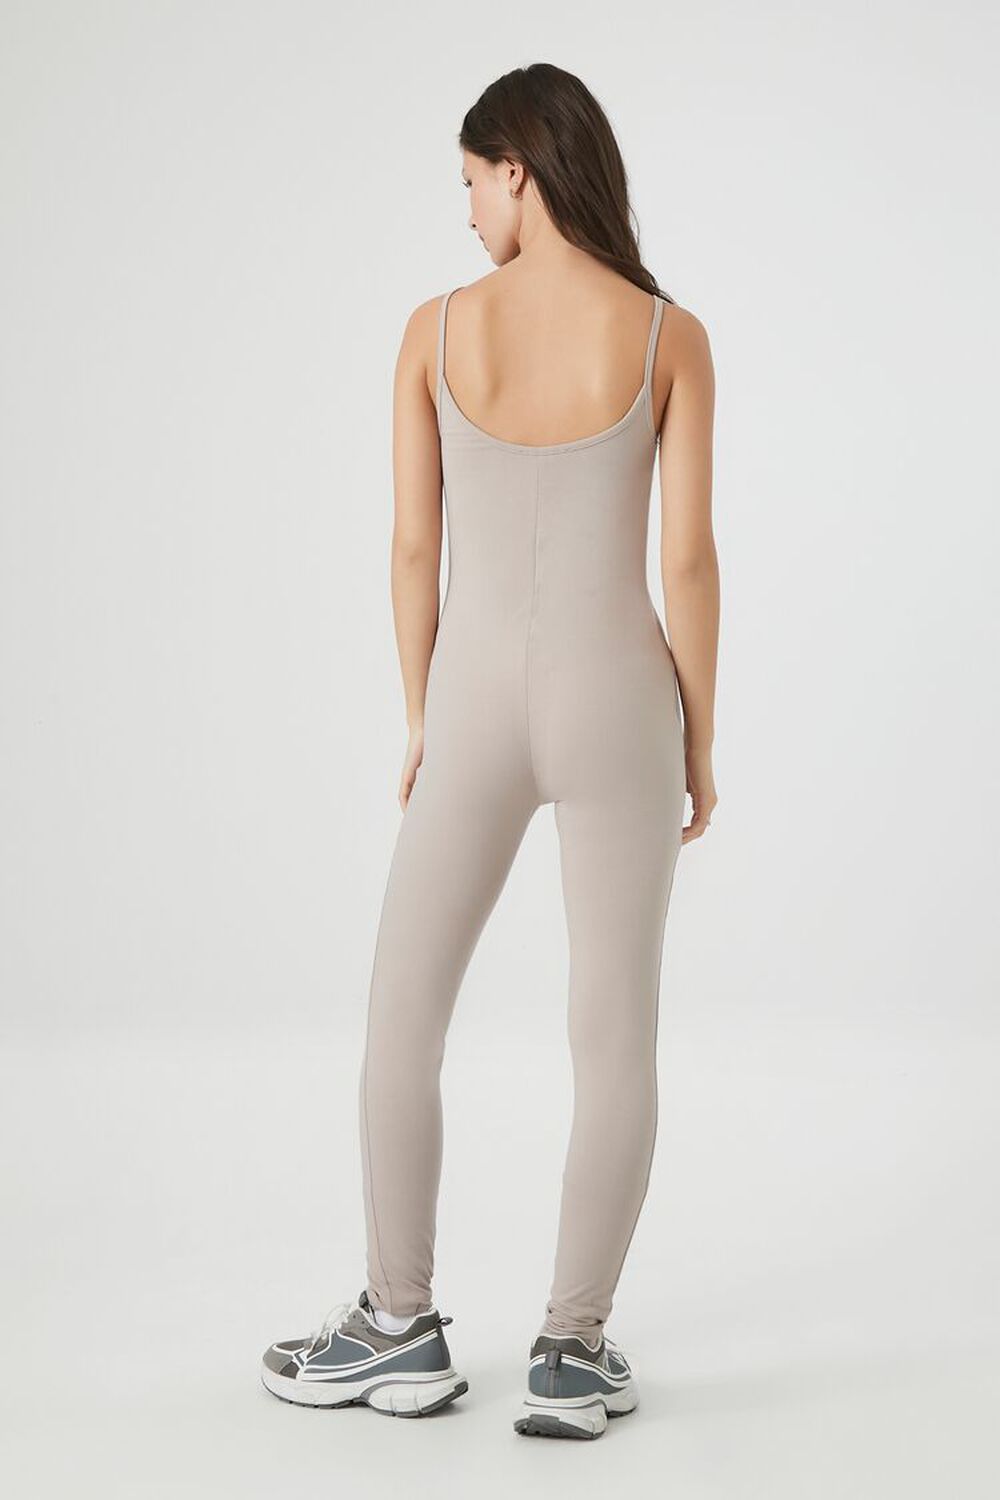 GOAT Fitted Cami Jumpsuit, image 3